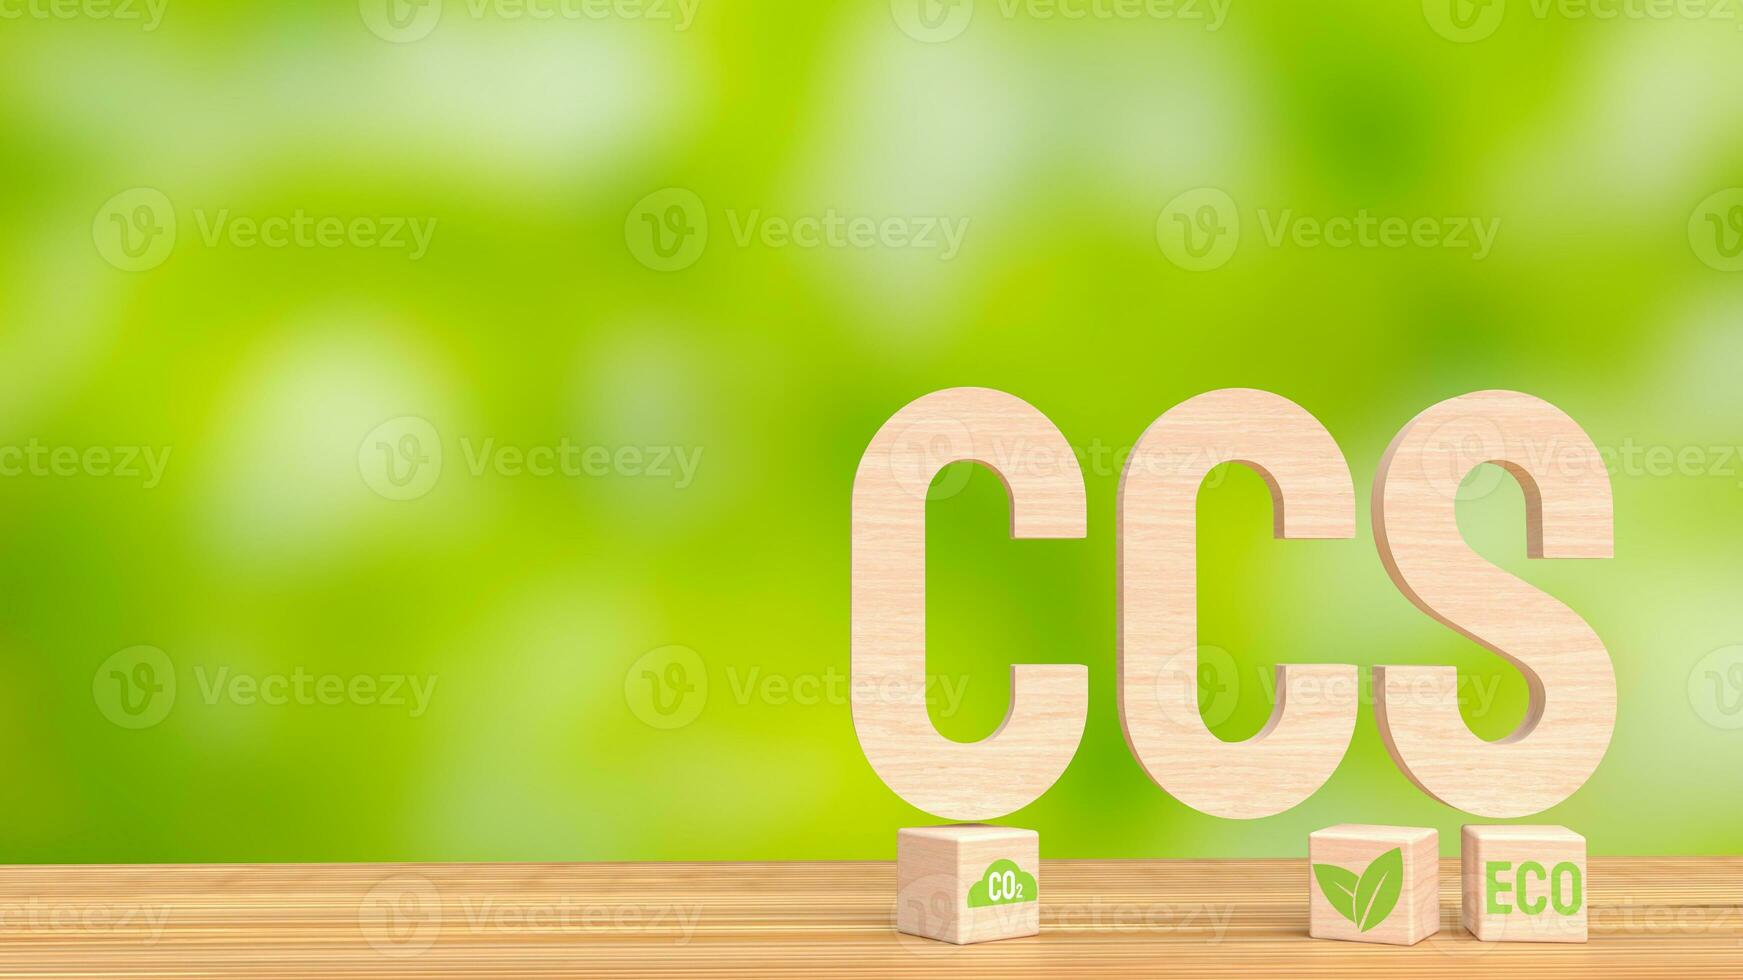 The ccs mean Carbon Capture and Storage for technology or eco concept 3d rendering photo